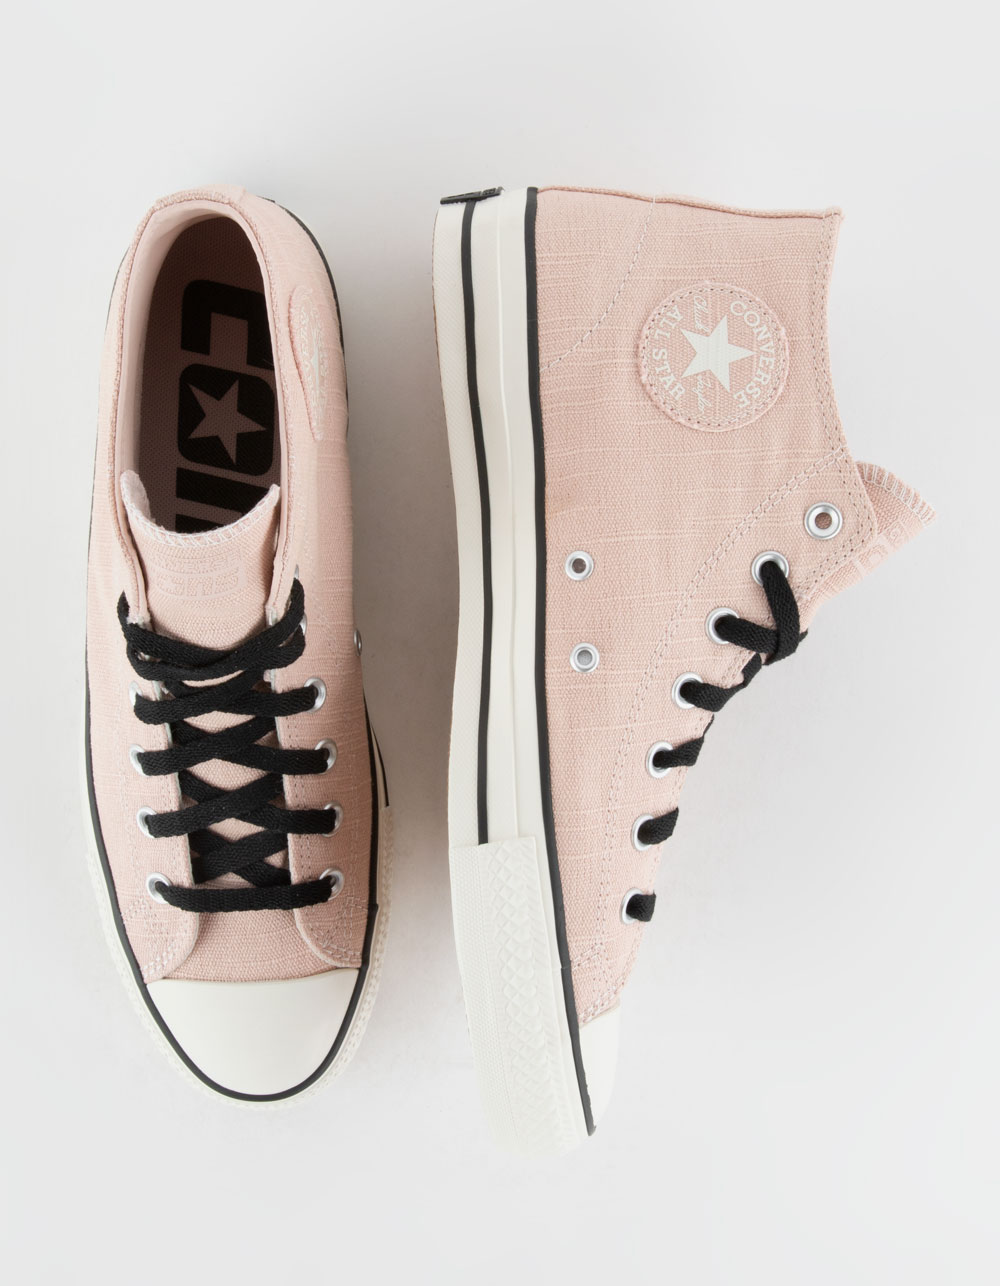 CONVERSE Chuck Taylor All Star Pro Mid Hemp Shoes - DUSTY PINK